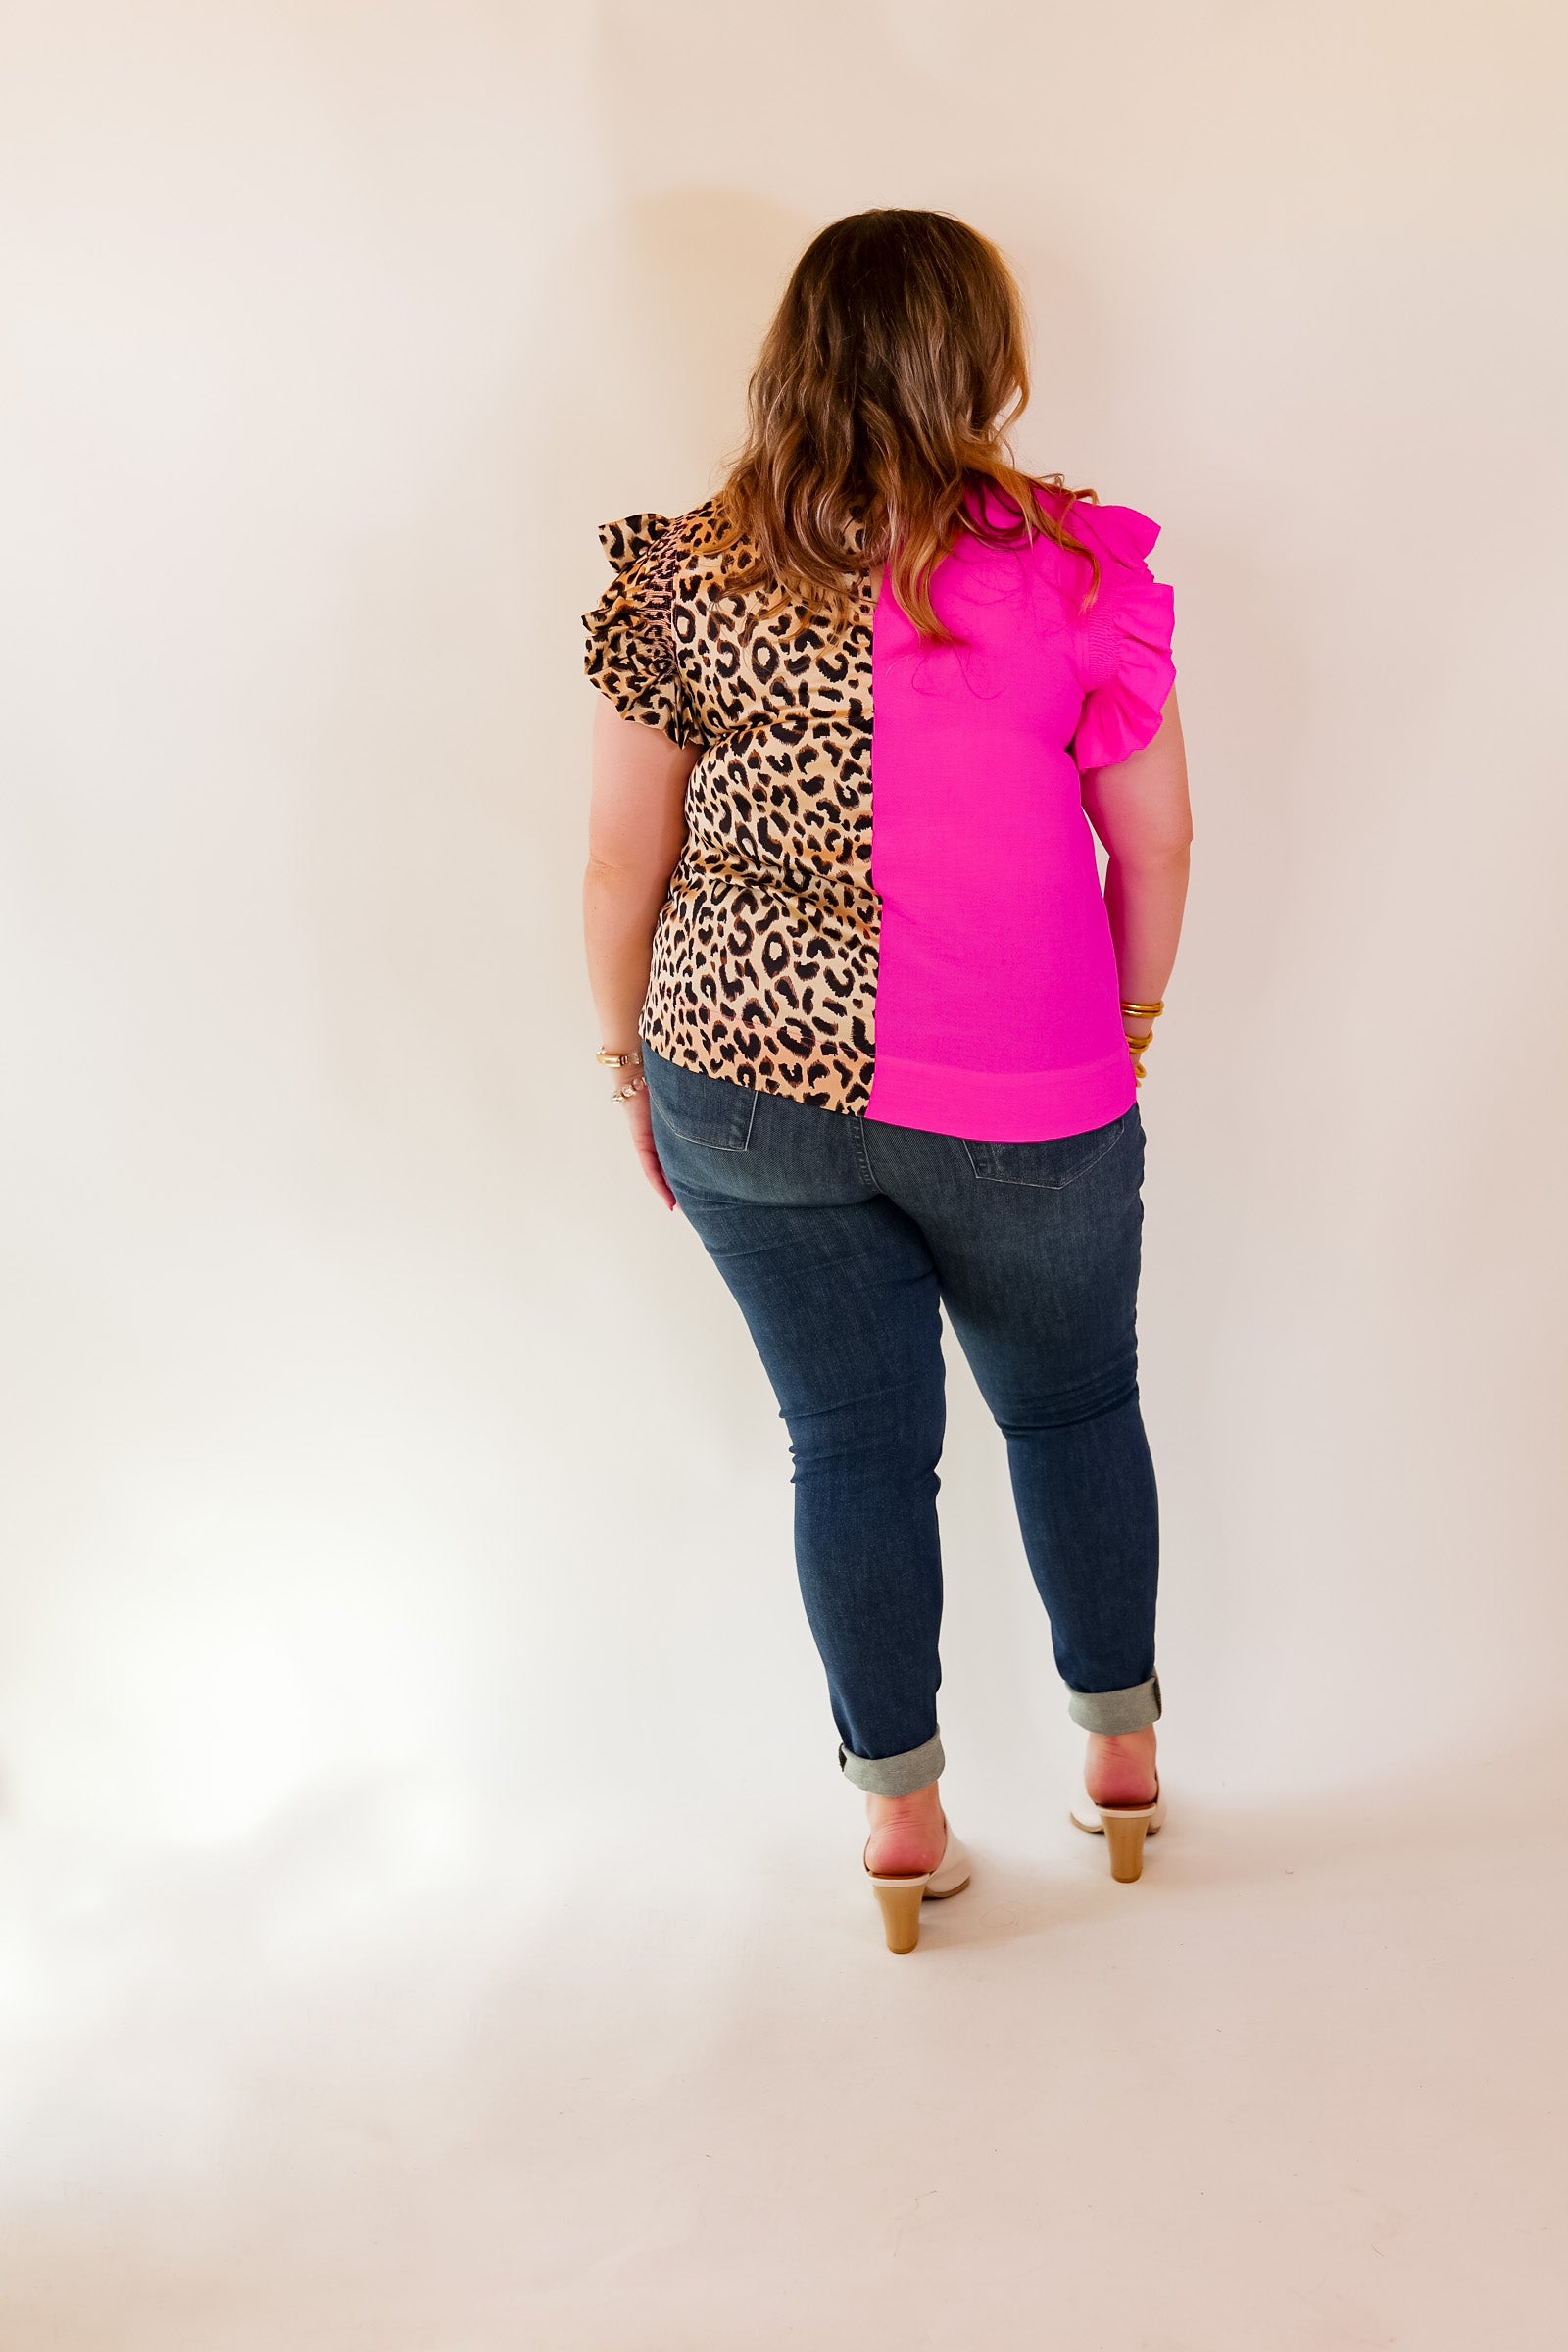 The Lively Side Split Print Top in Cheetah Print and Hot Pink - Giddy Up Glamour Boutique